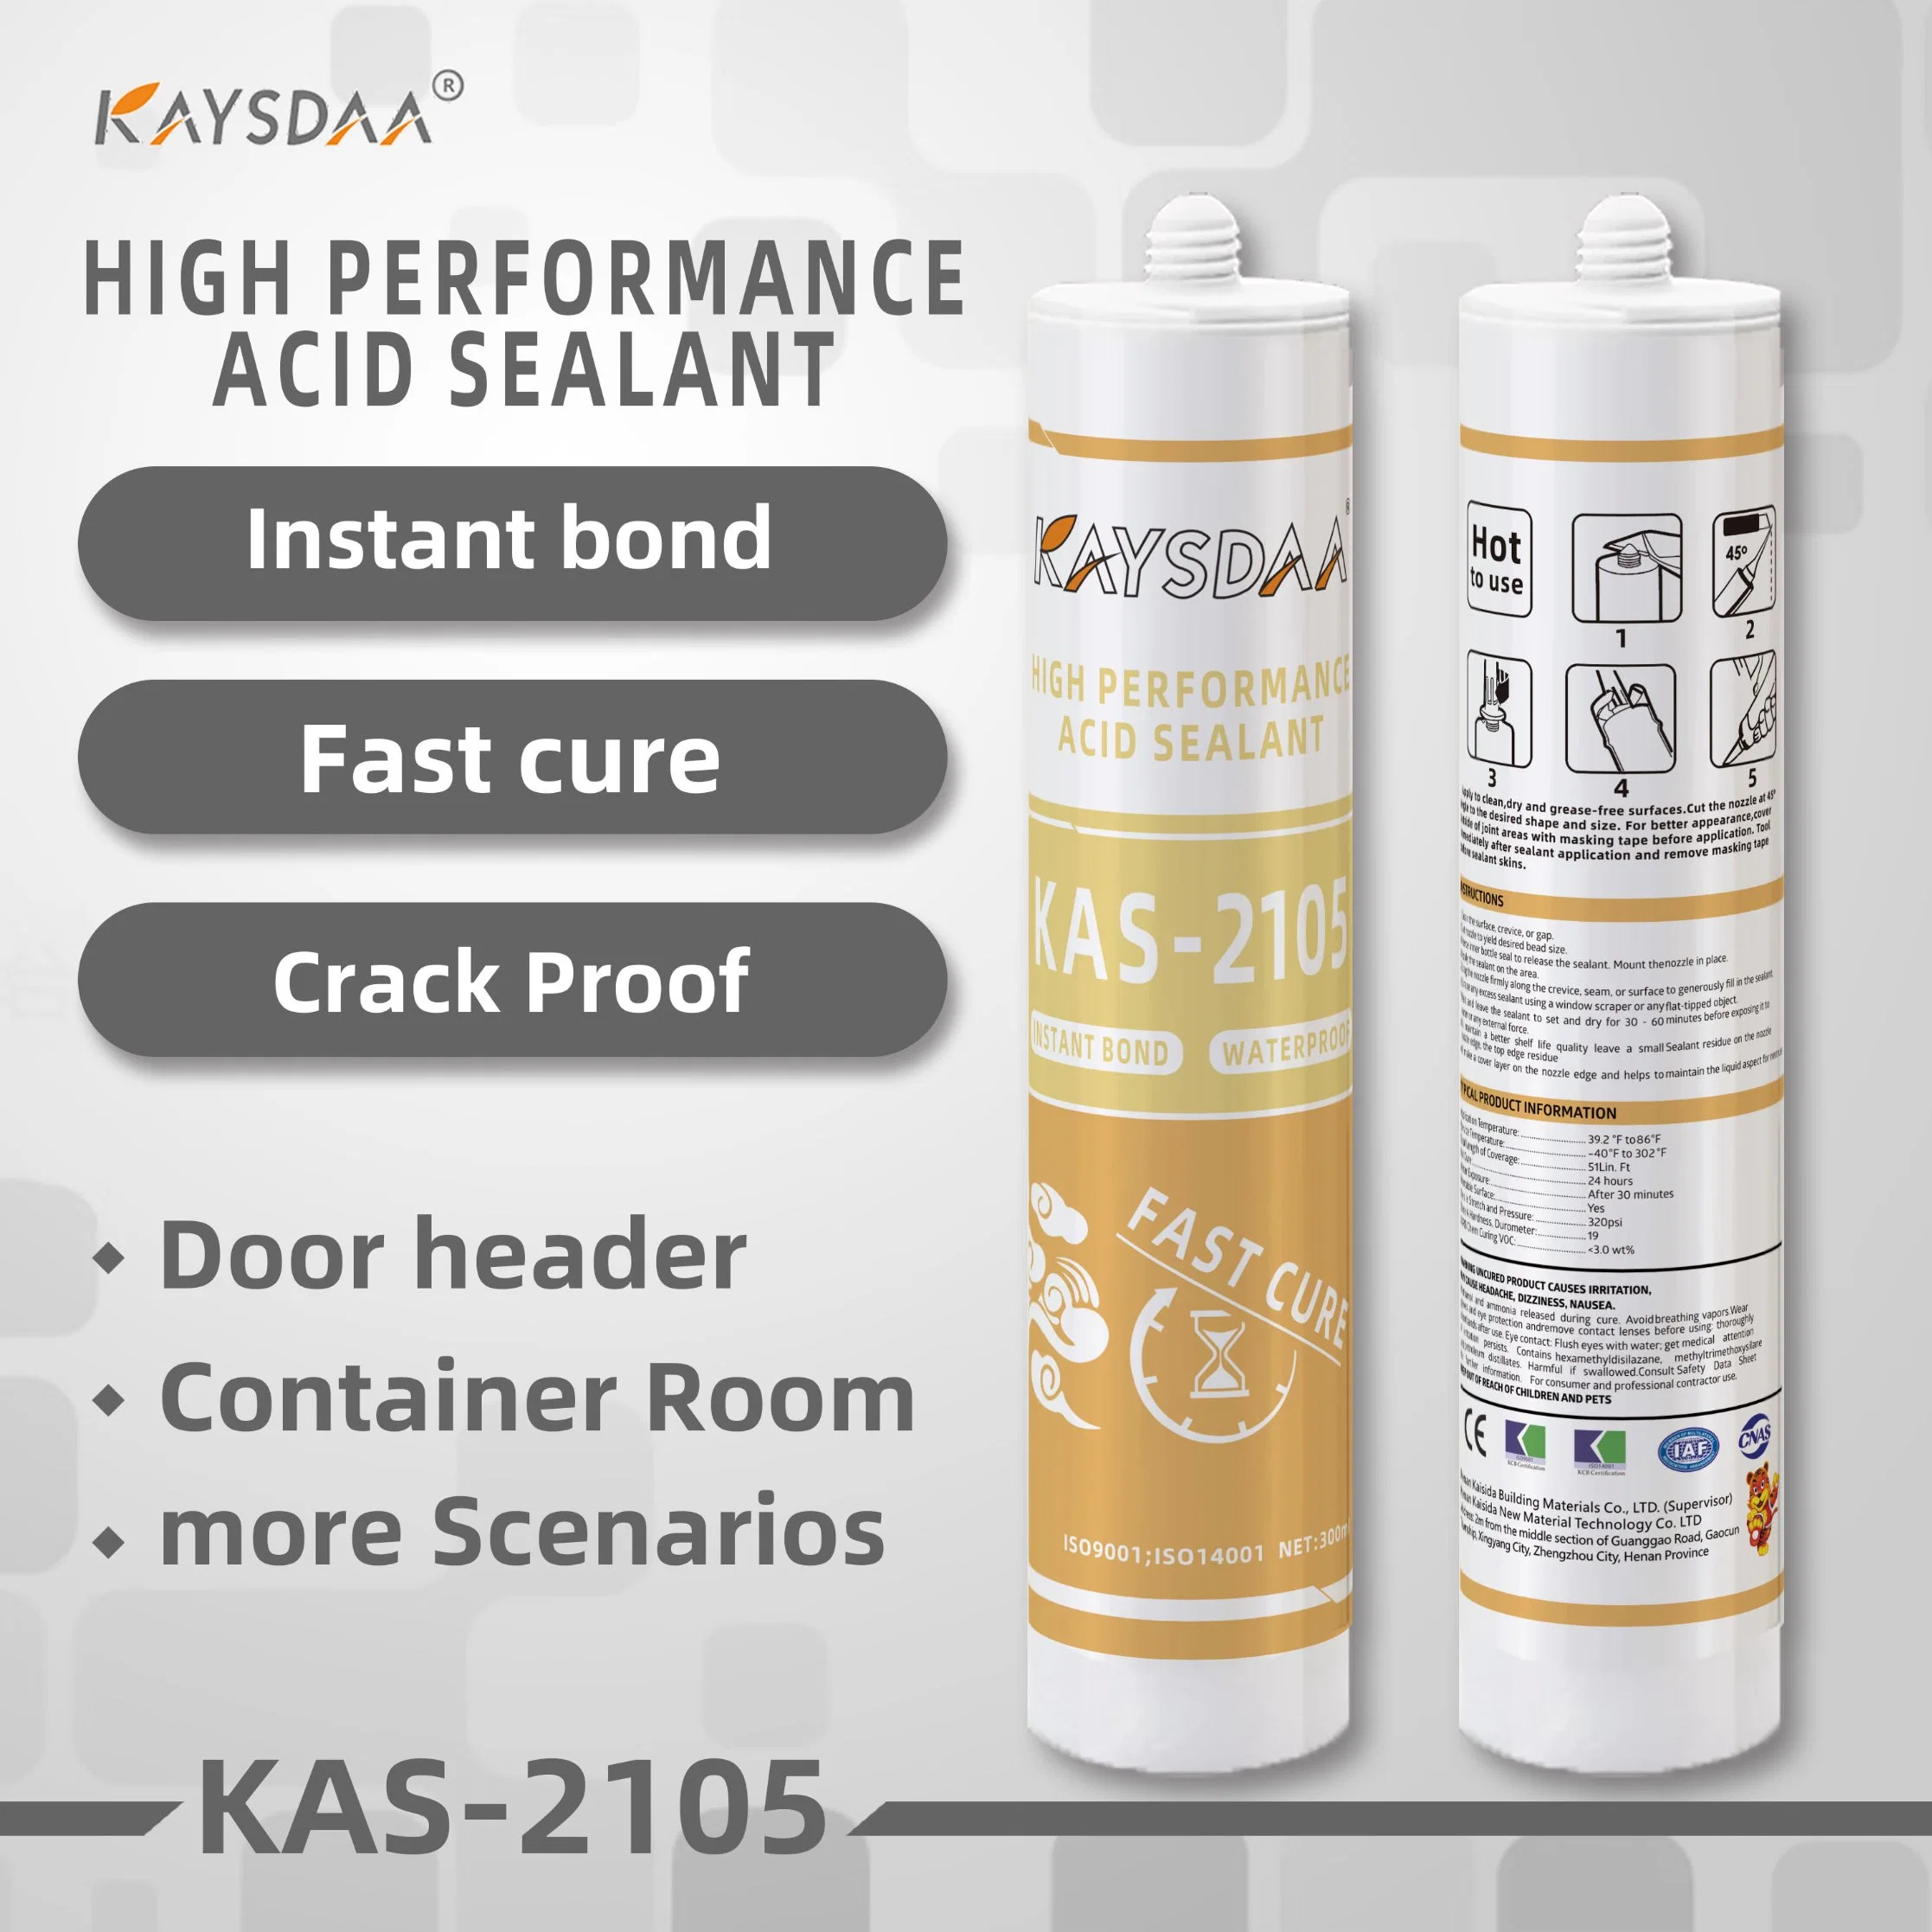 Kas-2105 Acid Sealant Specifically Designed for Exhibition Cabinets, Various Decoration Project